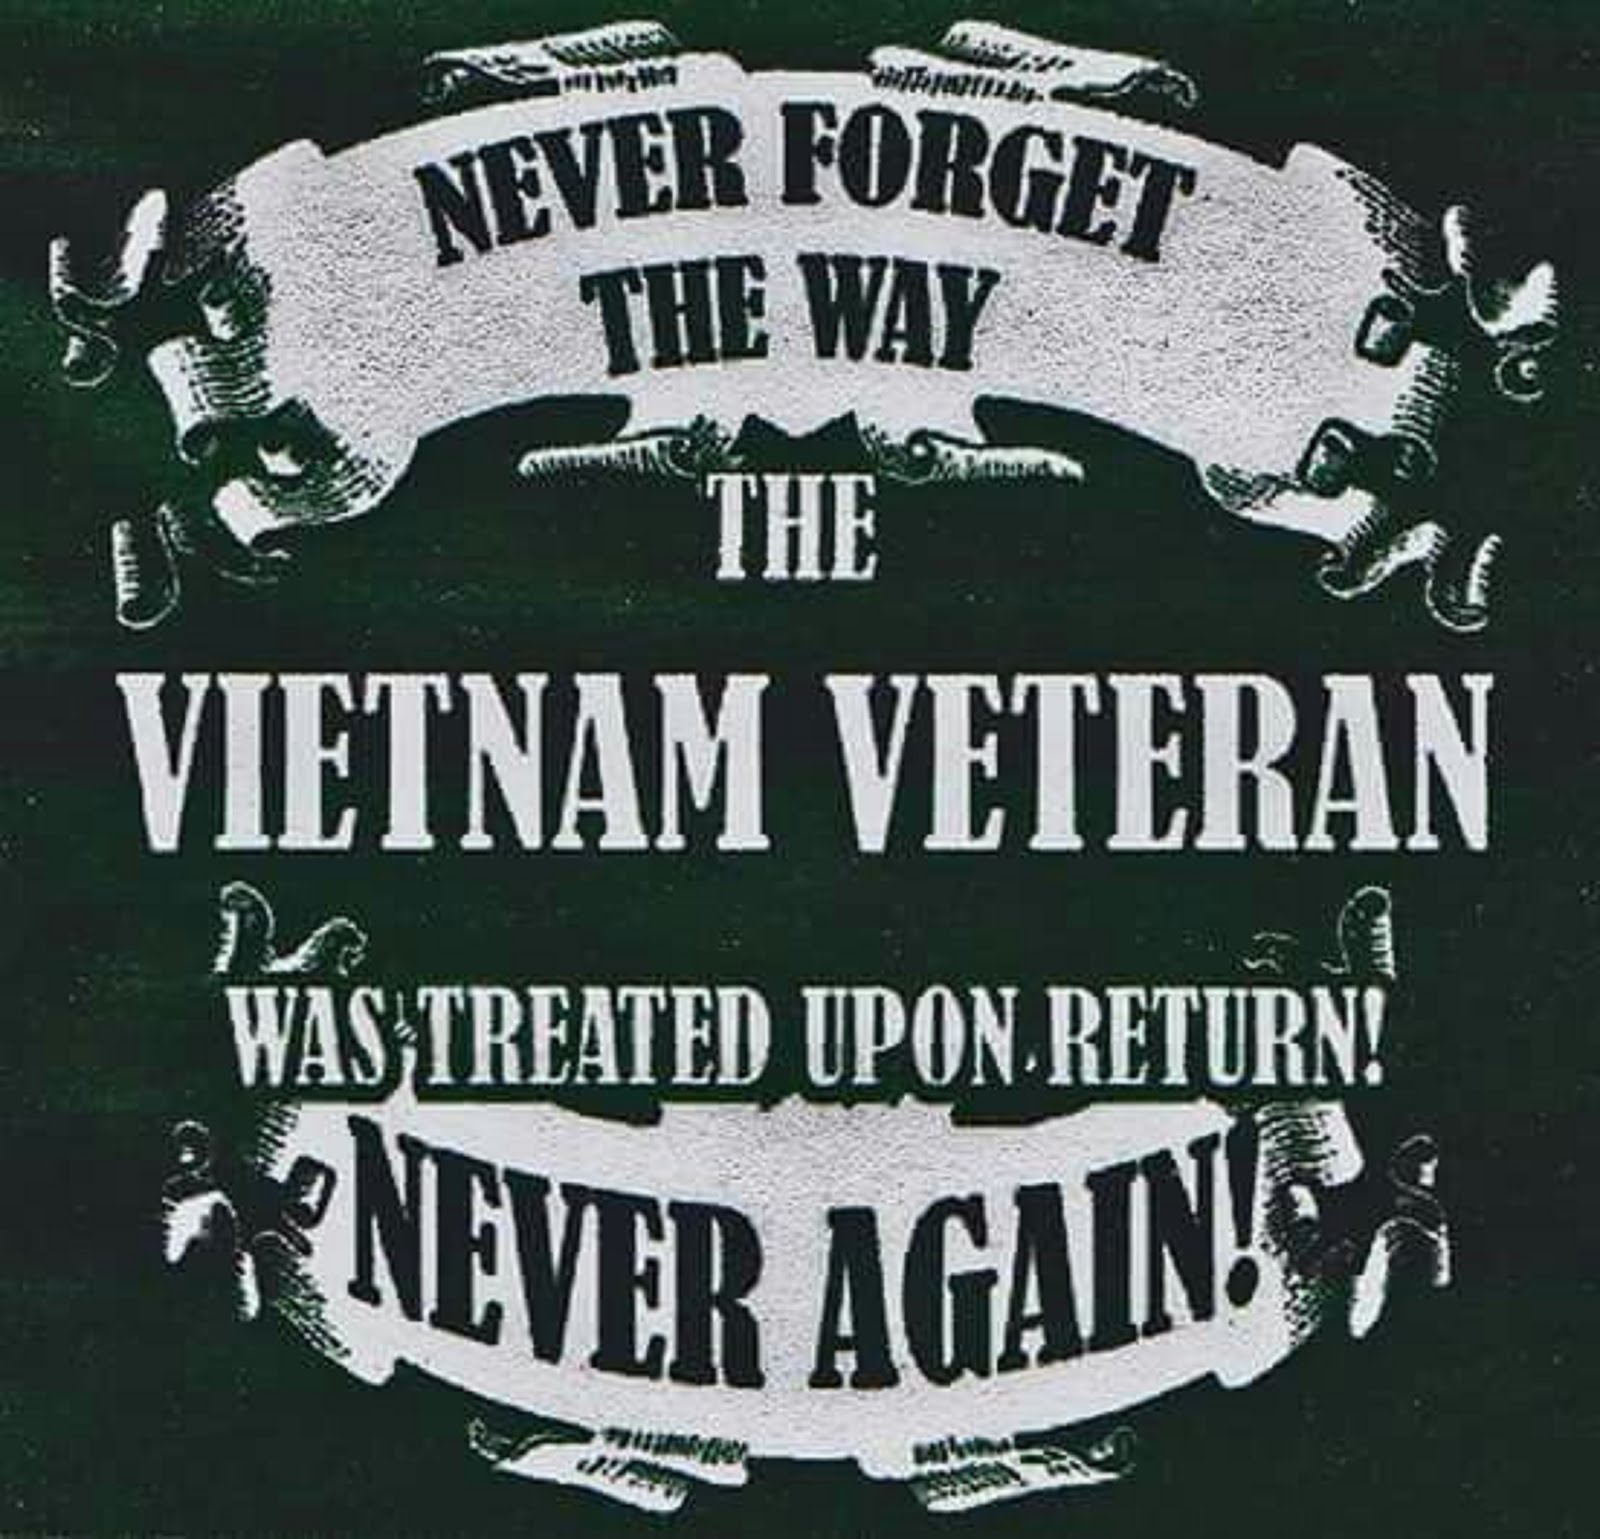 NEVER FORGET THE WAY THE VIETNAM VETERAN WAS TREATED WHEN WE ARRIVED HOME